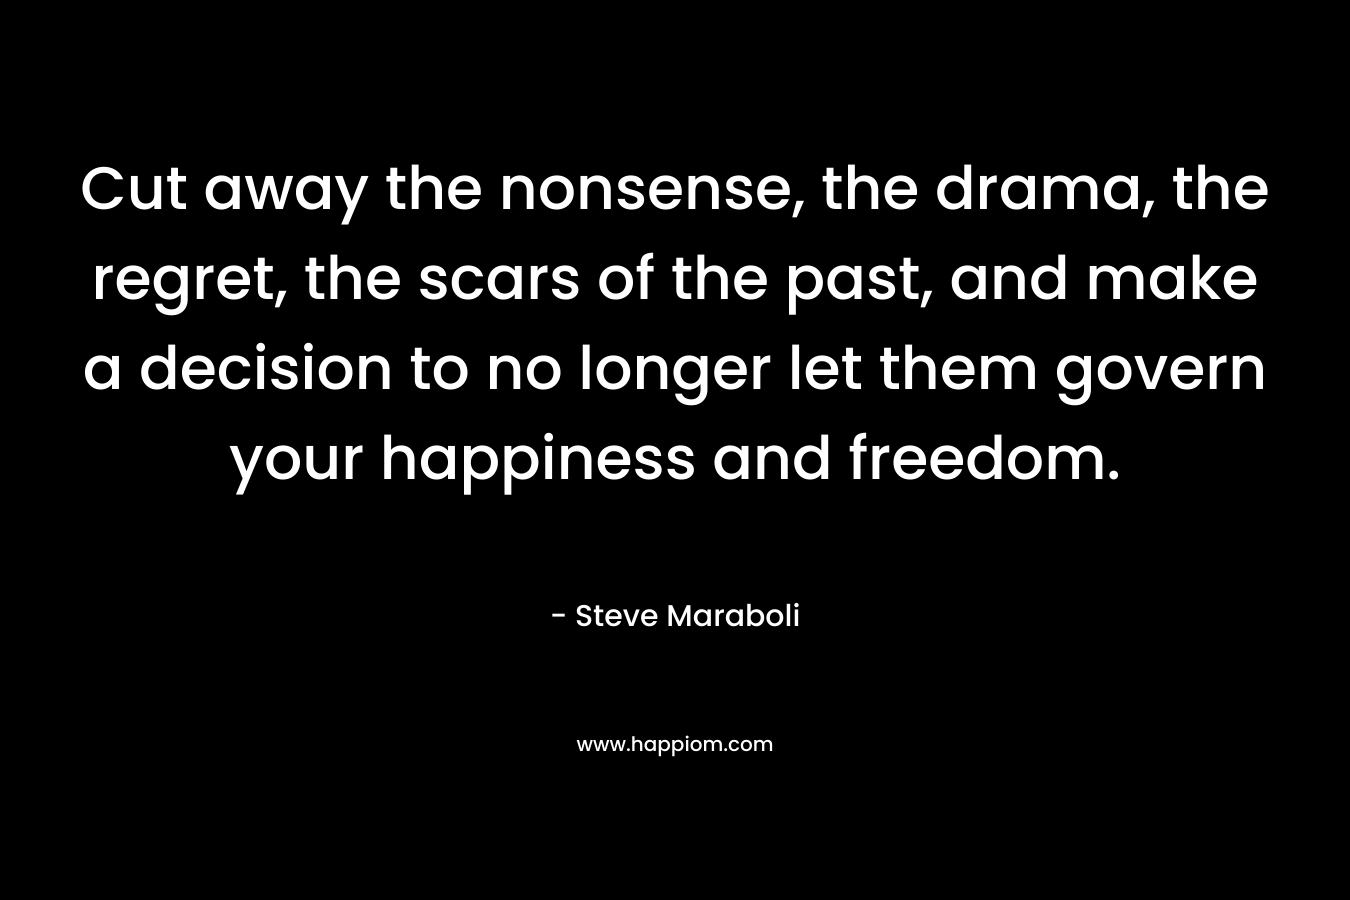 Cut away the nonsense, the drama, the regret, the scars of the past, and make a decision to no longer let them govern your happiness and freedom. – Steve Maraboli